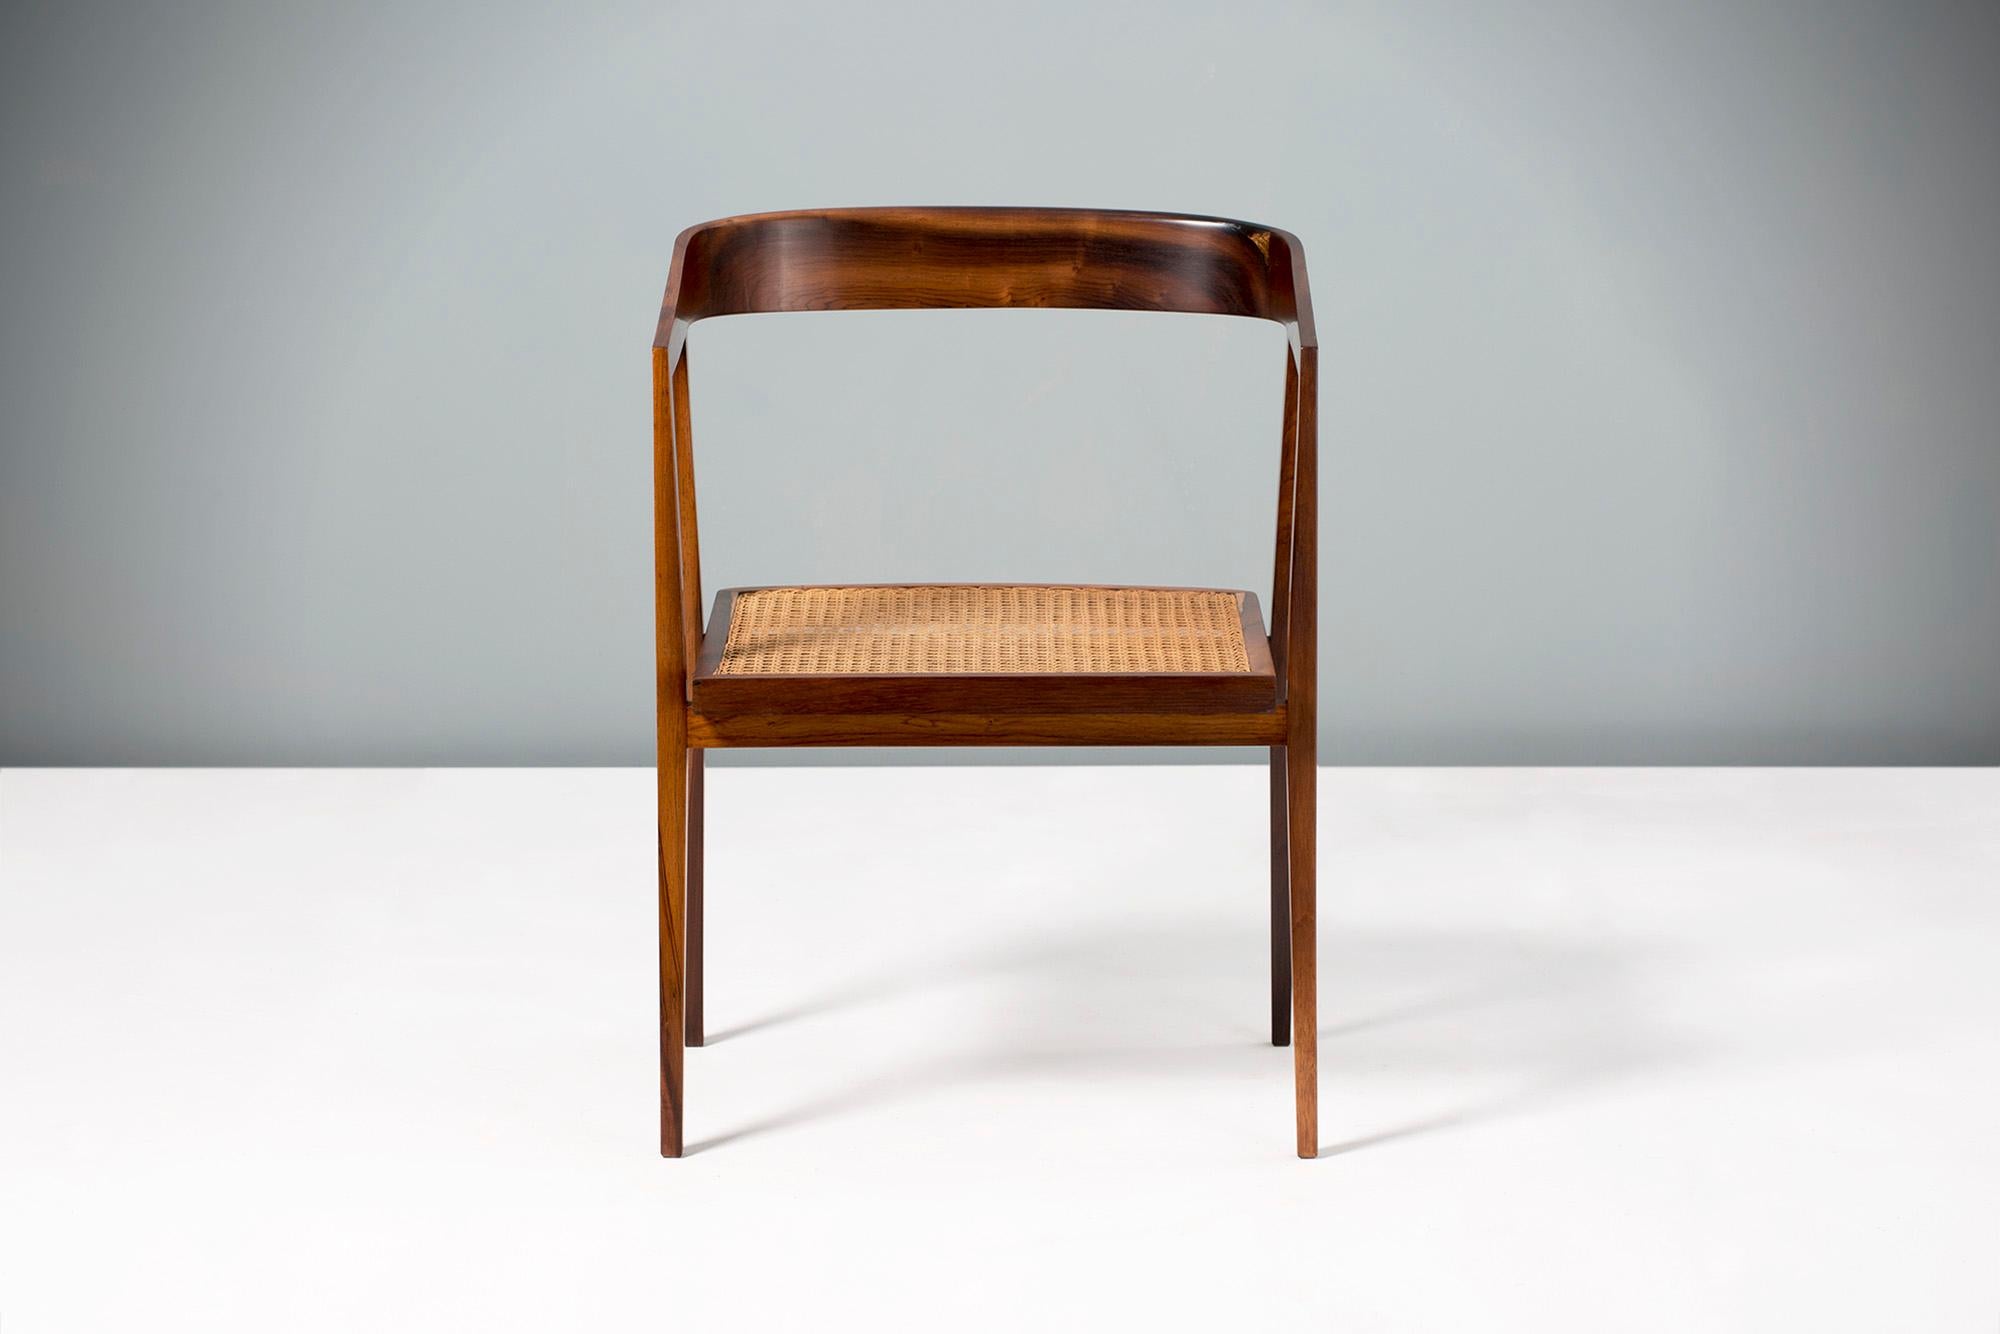 Joaquim Tenreiro 

(Brazilian, 1906-1992) 

Armchair produced in Pau Ferro wood (Santos Rosewood) and cane in the 1960s.

One of Tenreiro's most collectible and sought after chairs. This example is in immaculate condition with no breaks or